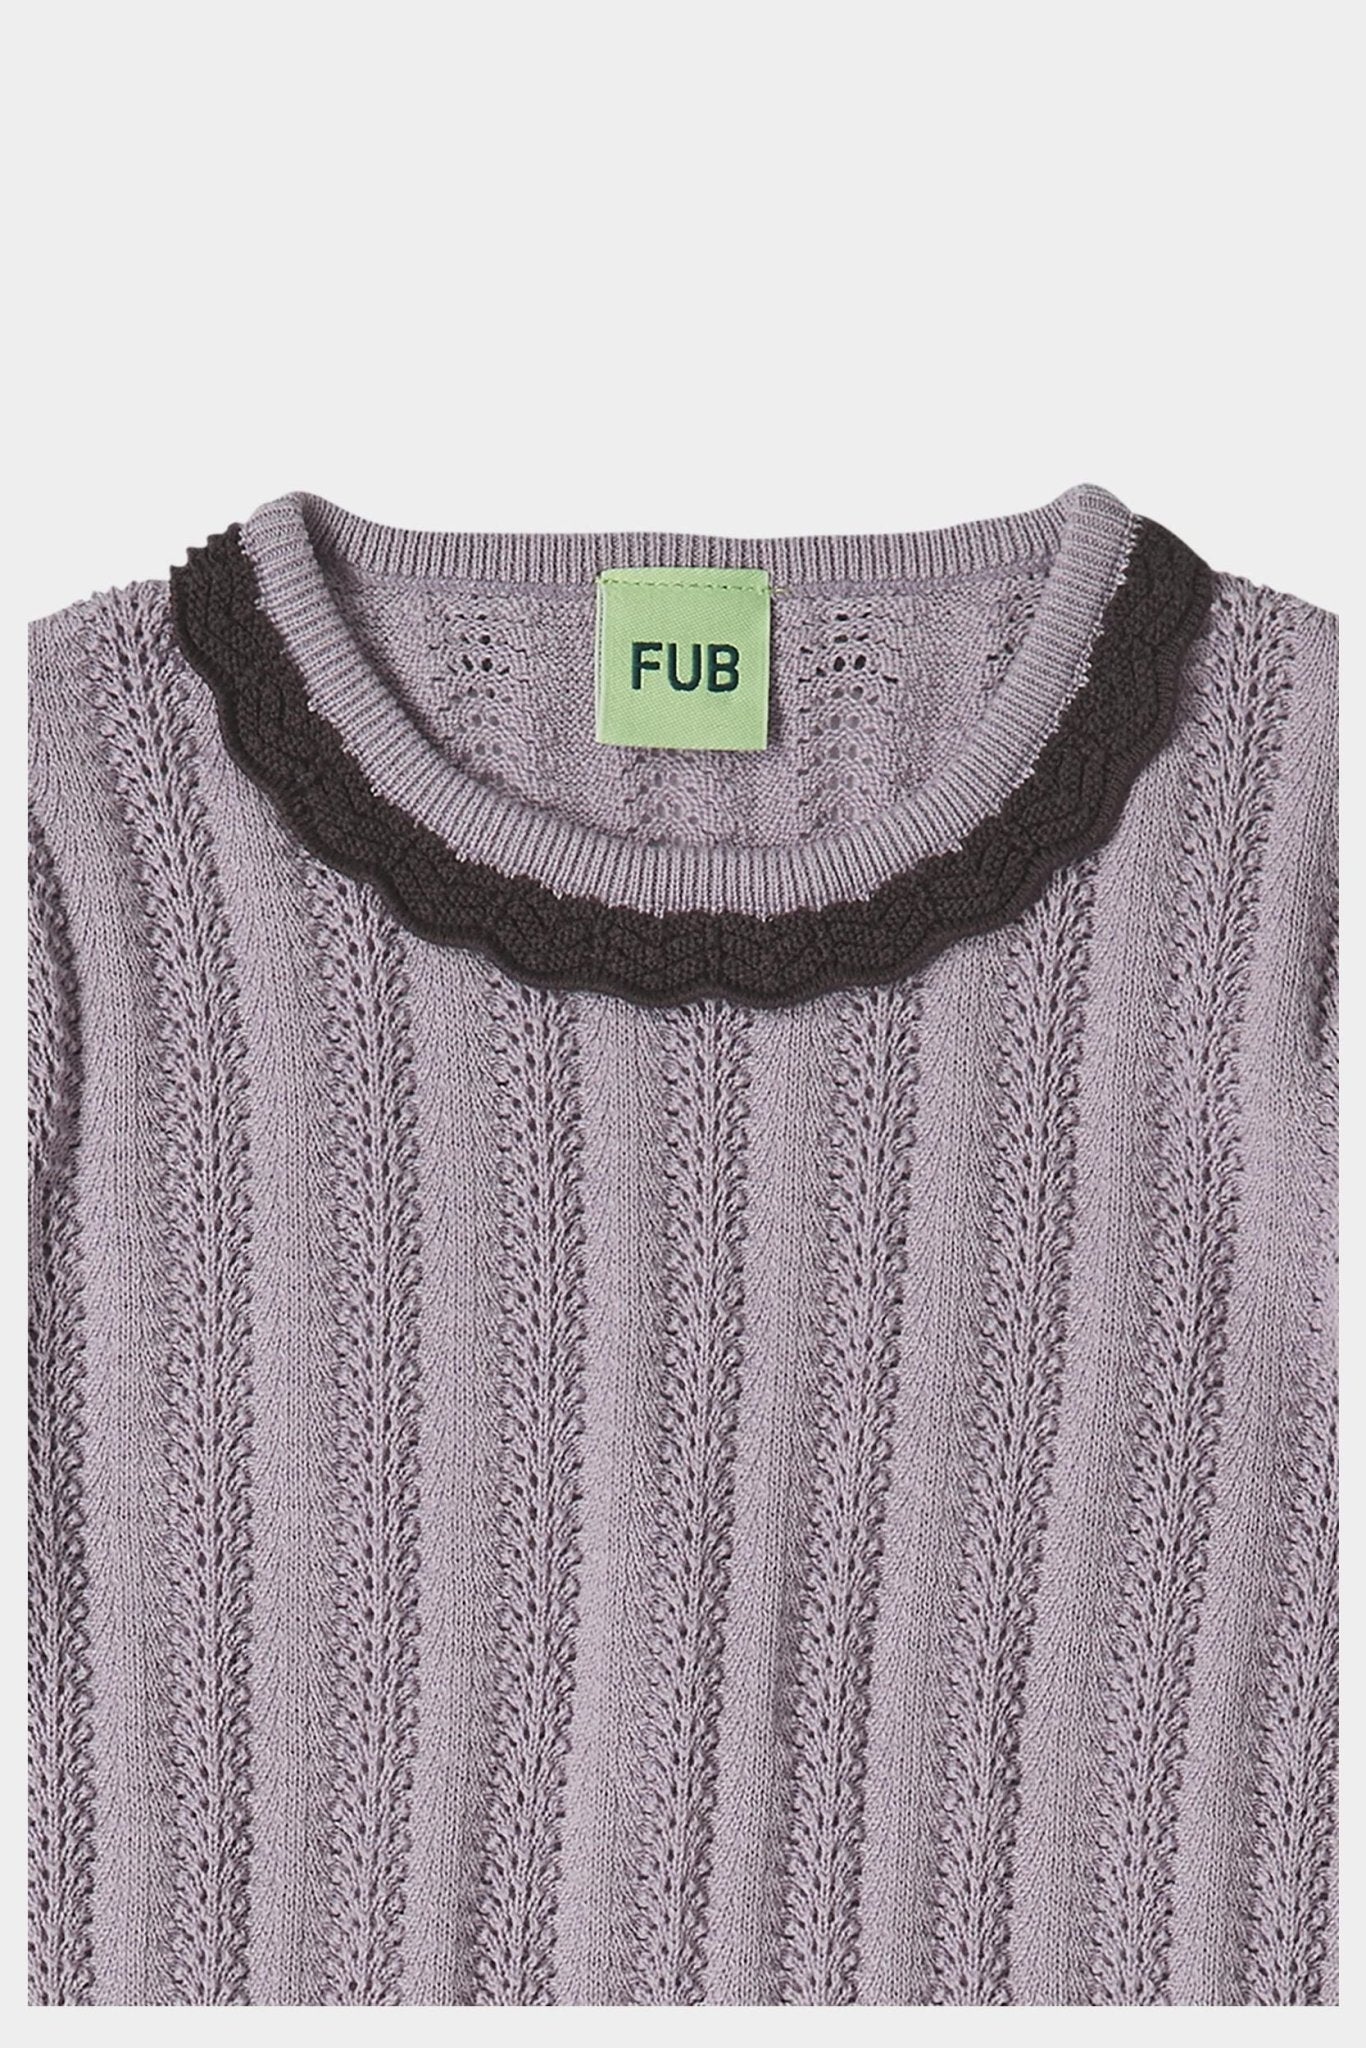 FUB POINTELLE T-SHIRT heather-2124SS_heather - Lille Univers